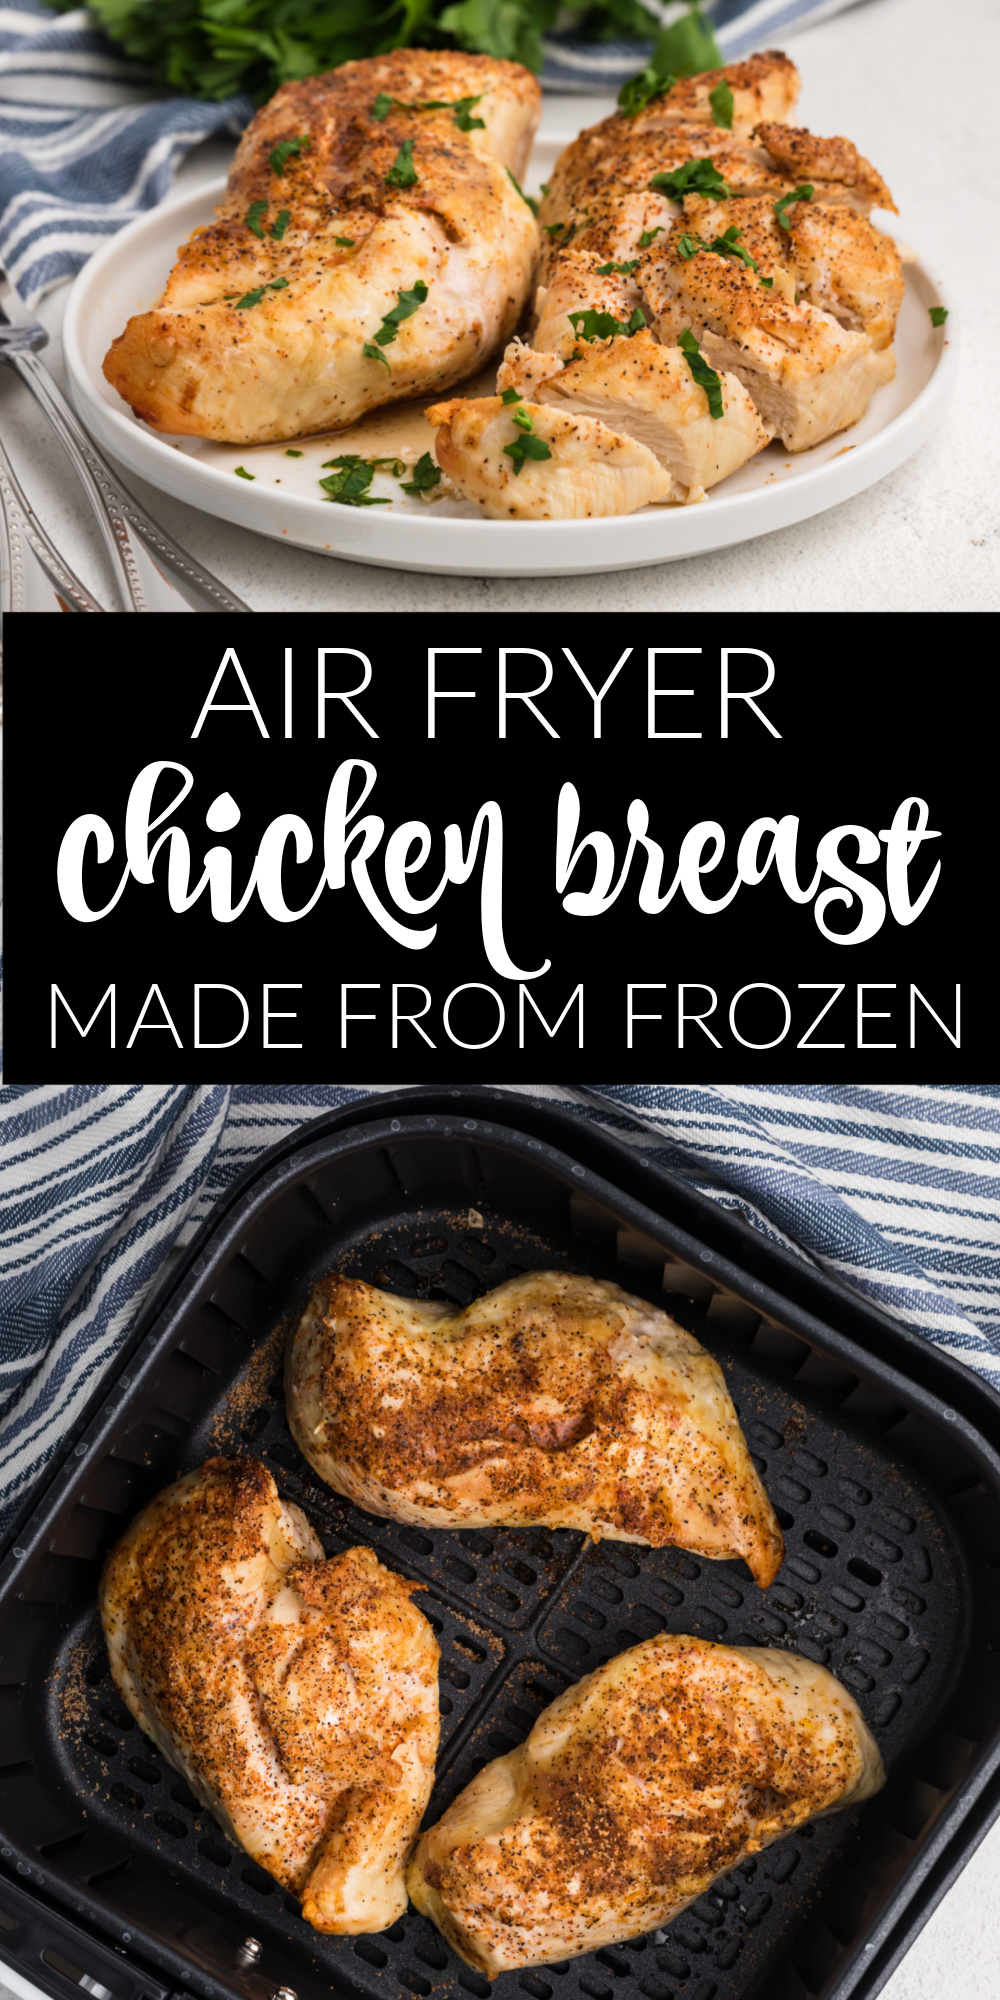 How To Cook Frozen chicken breasts in the air fryer - A juicy chicken breast is guaranteed to become your new favorite dinner staple. From freezer to air fryer with no thawing time in between, the frozen chicken breasts cooks beautifully. Every mouthful is deliciously browned, tender, and juicy. And, thanks to many seasoning options, these frozen chicken breasts can be served with your favorite side dishes helping you to create a delicious, easy chicken dinner.